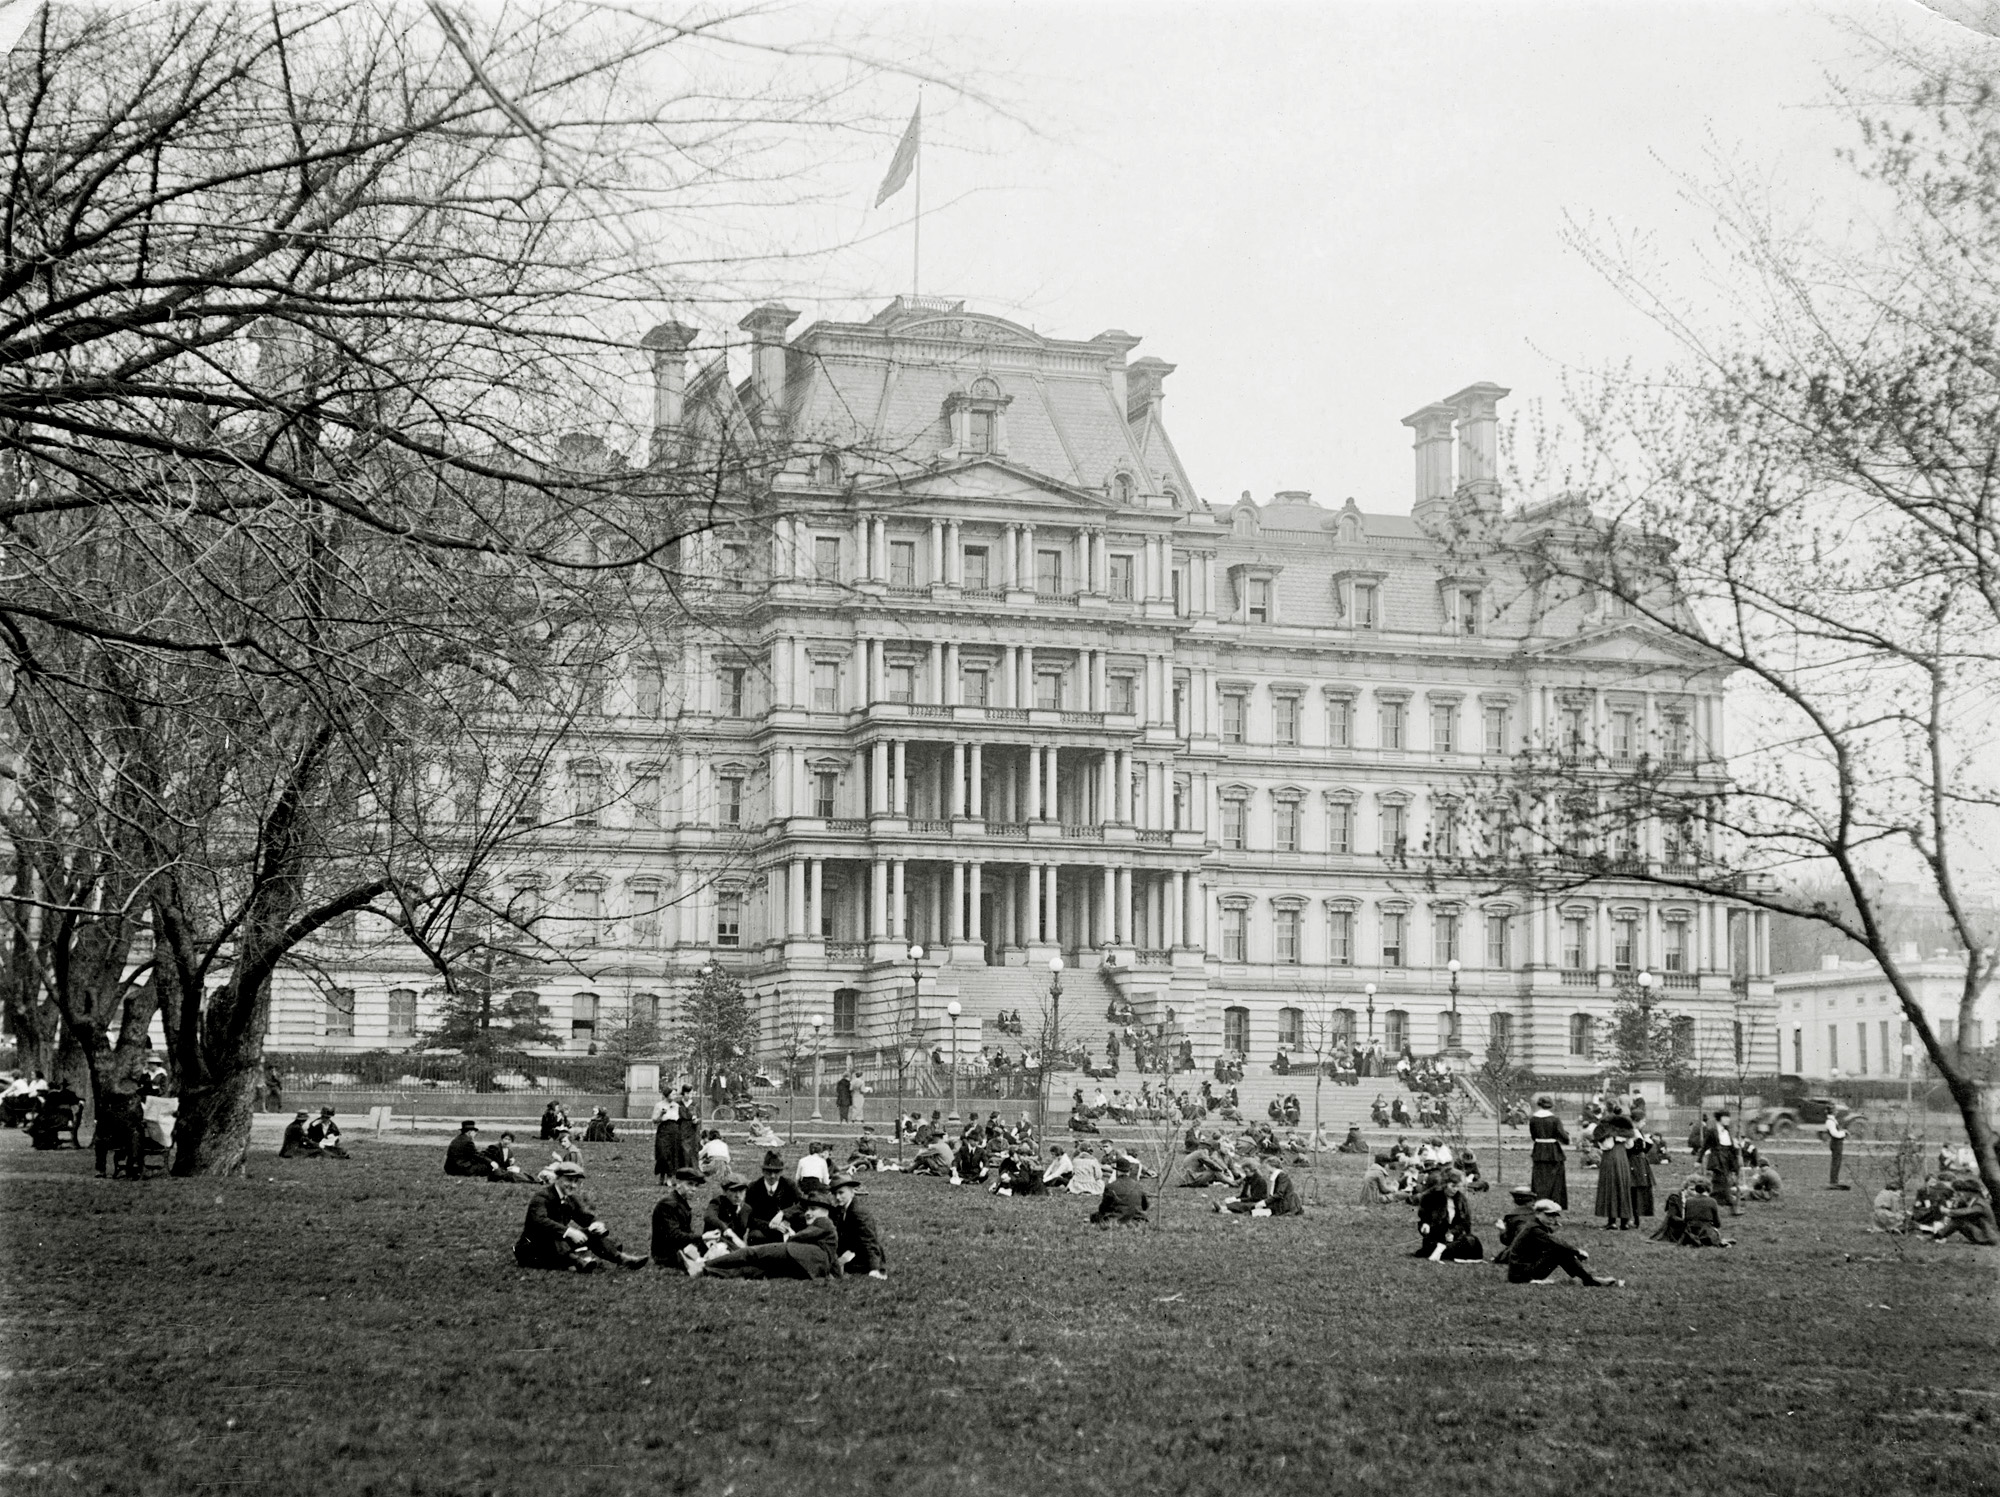 State, War & Navy Building, Washington D.C. circa 1917. Now called the Eisenhower Executive Office Building. Most likely taken by my great-grandfather, Frank Townley Chapman. View full size.